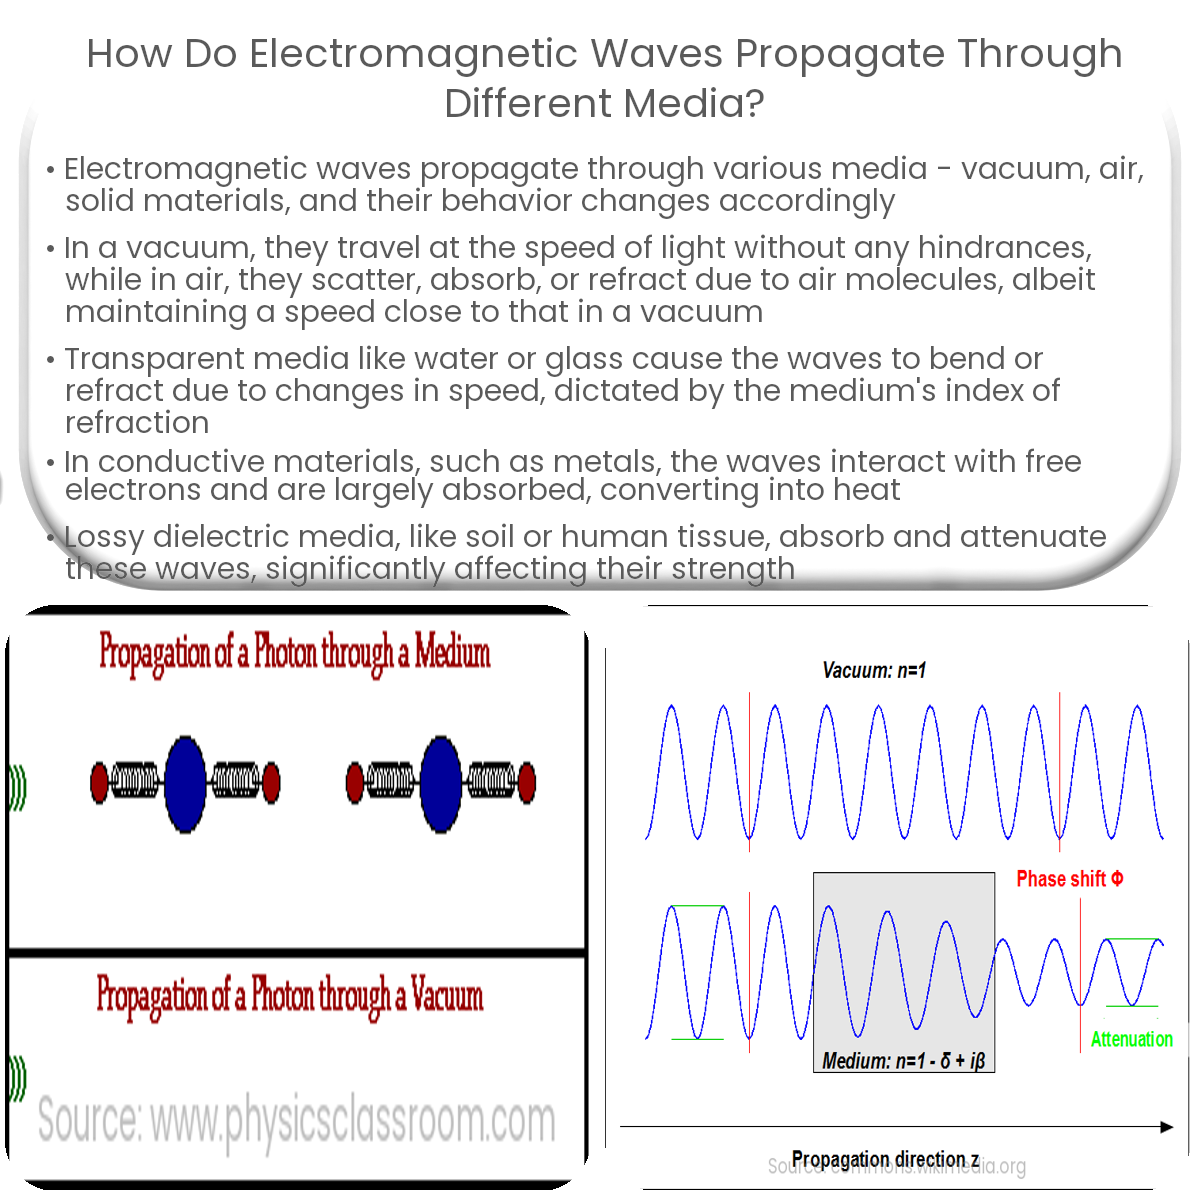 How do electromagnetic waves propagate through different media?